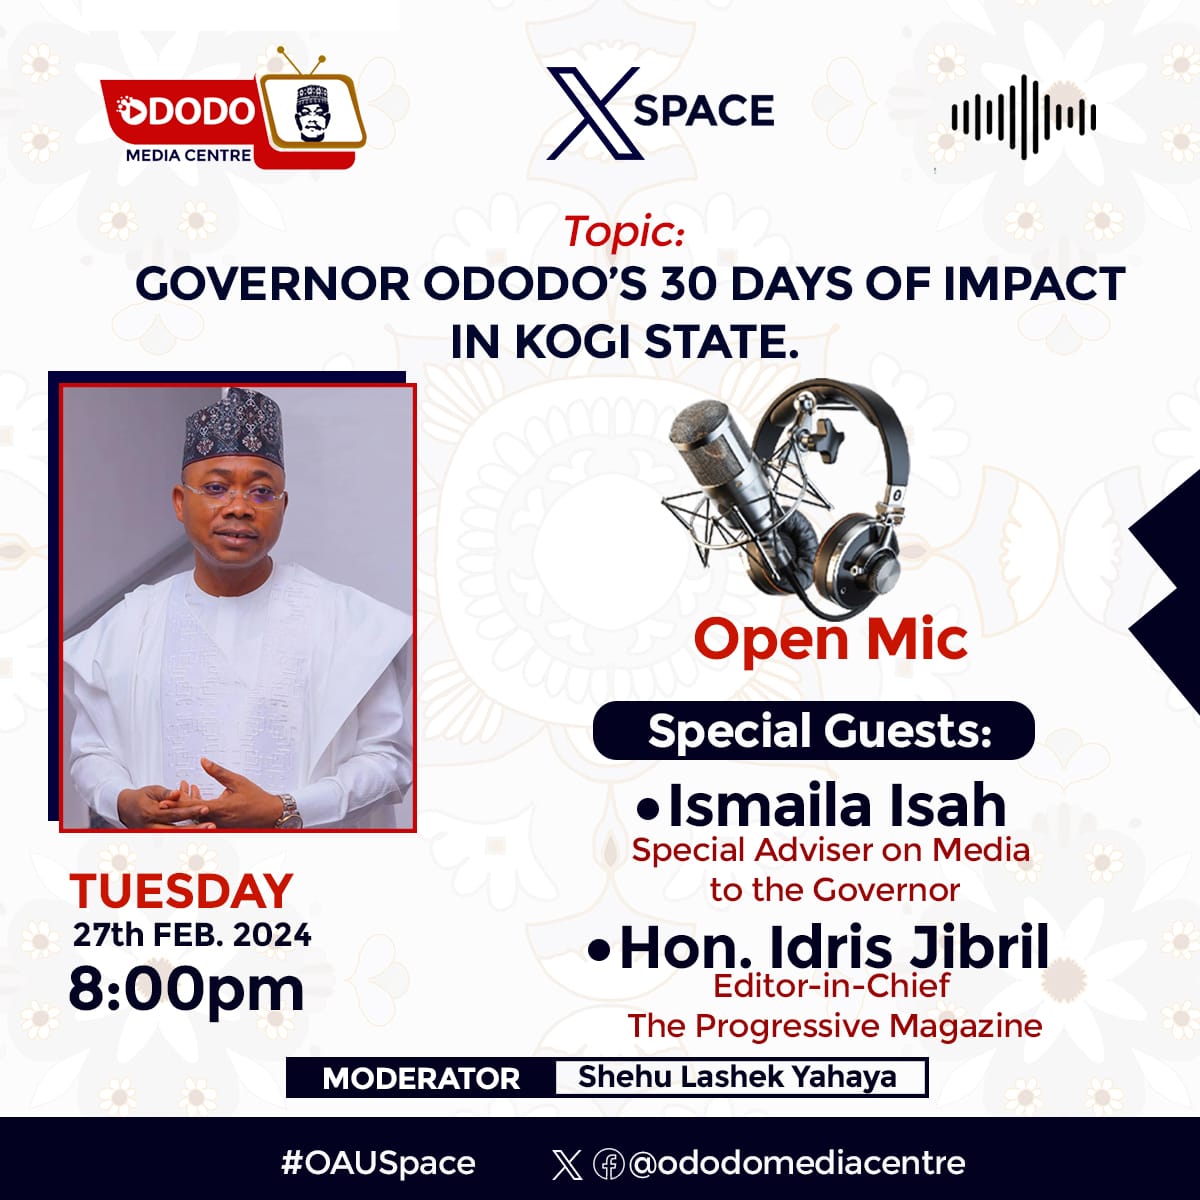 Join the Conversation: GOVERNOR ODODO'S 30 DAYS OF IMPACT IN KOGI STATE

What's your take?

#ododojoel #MakingADifference 
@OfficialOAU @OfficialGYBKogi @OfficialAPCNg @zozaismail @lasheck